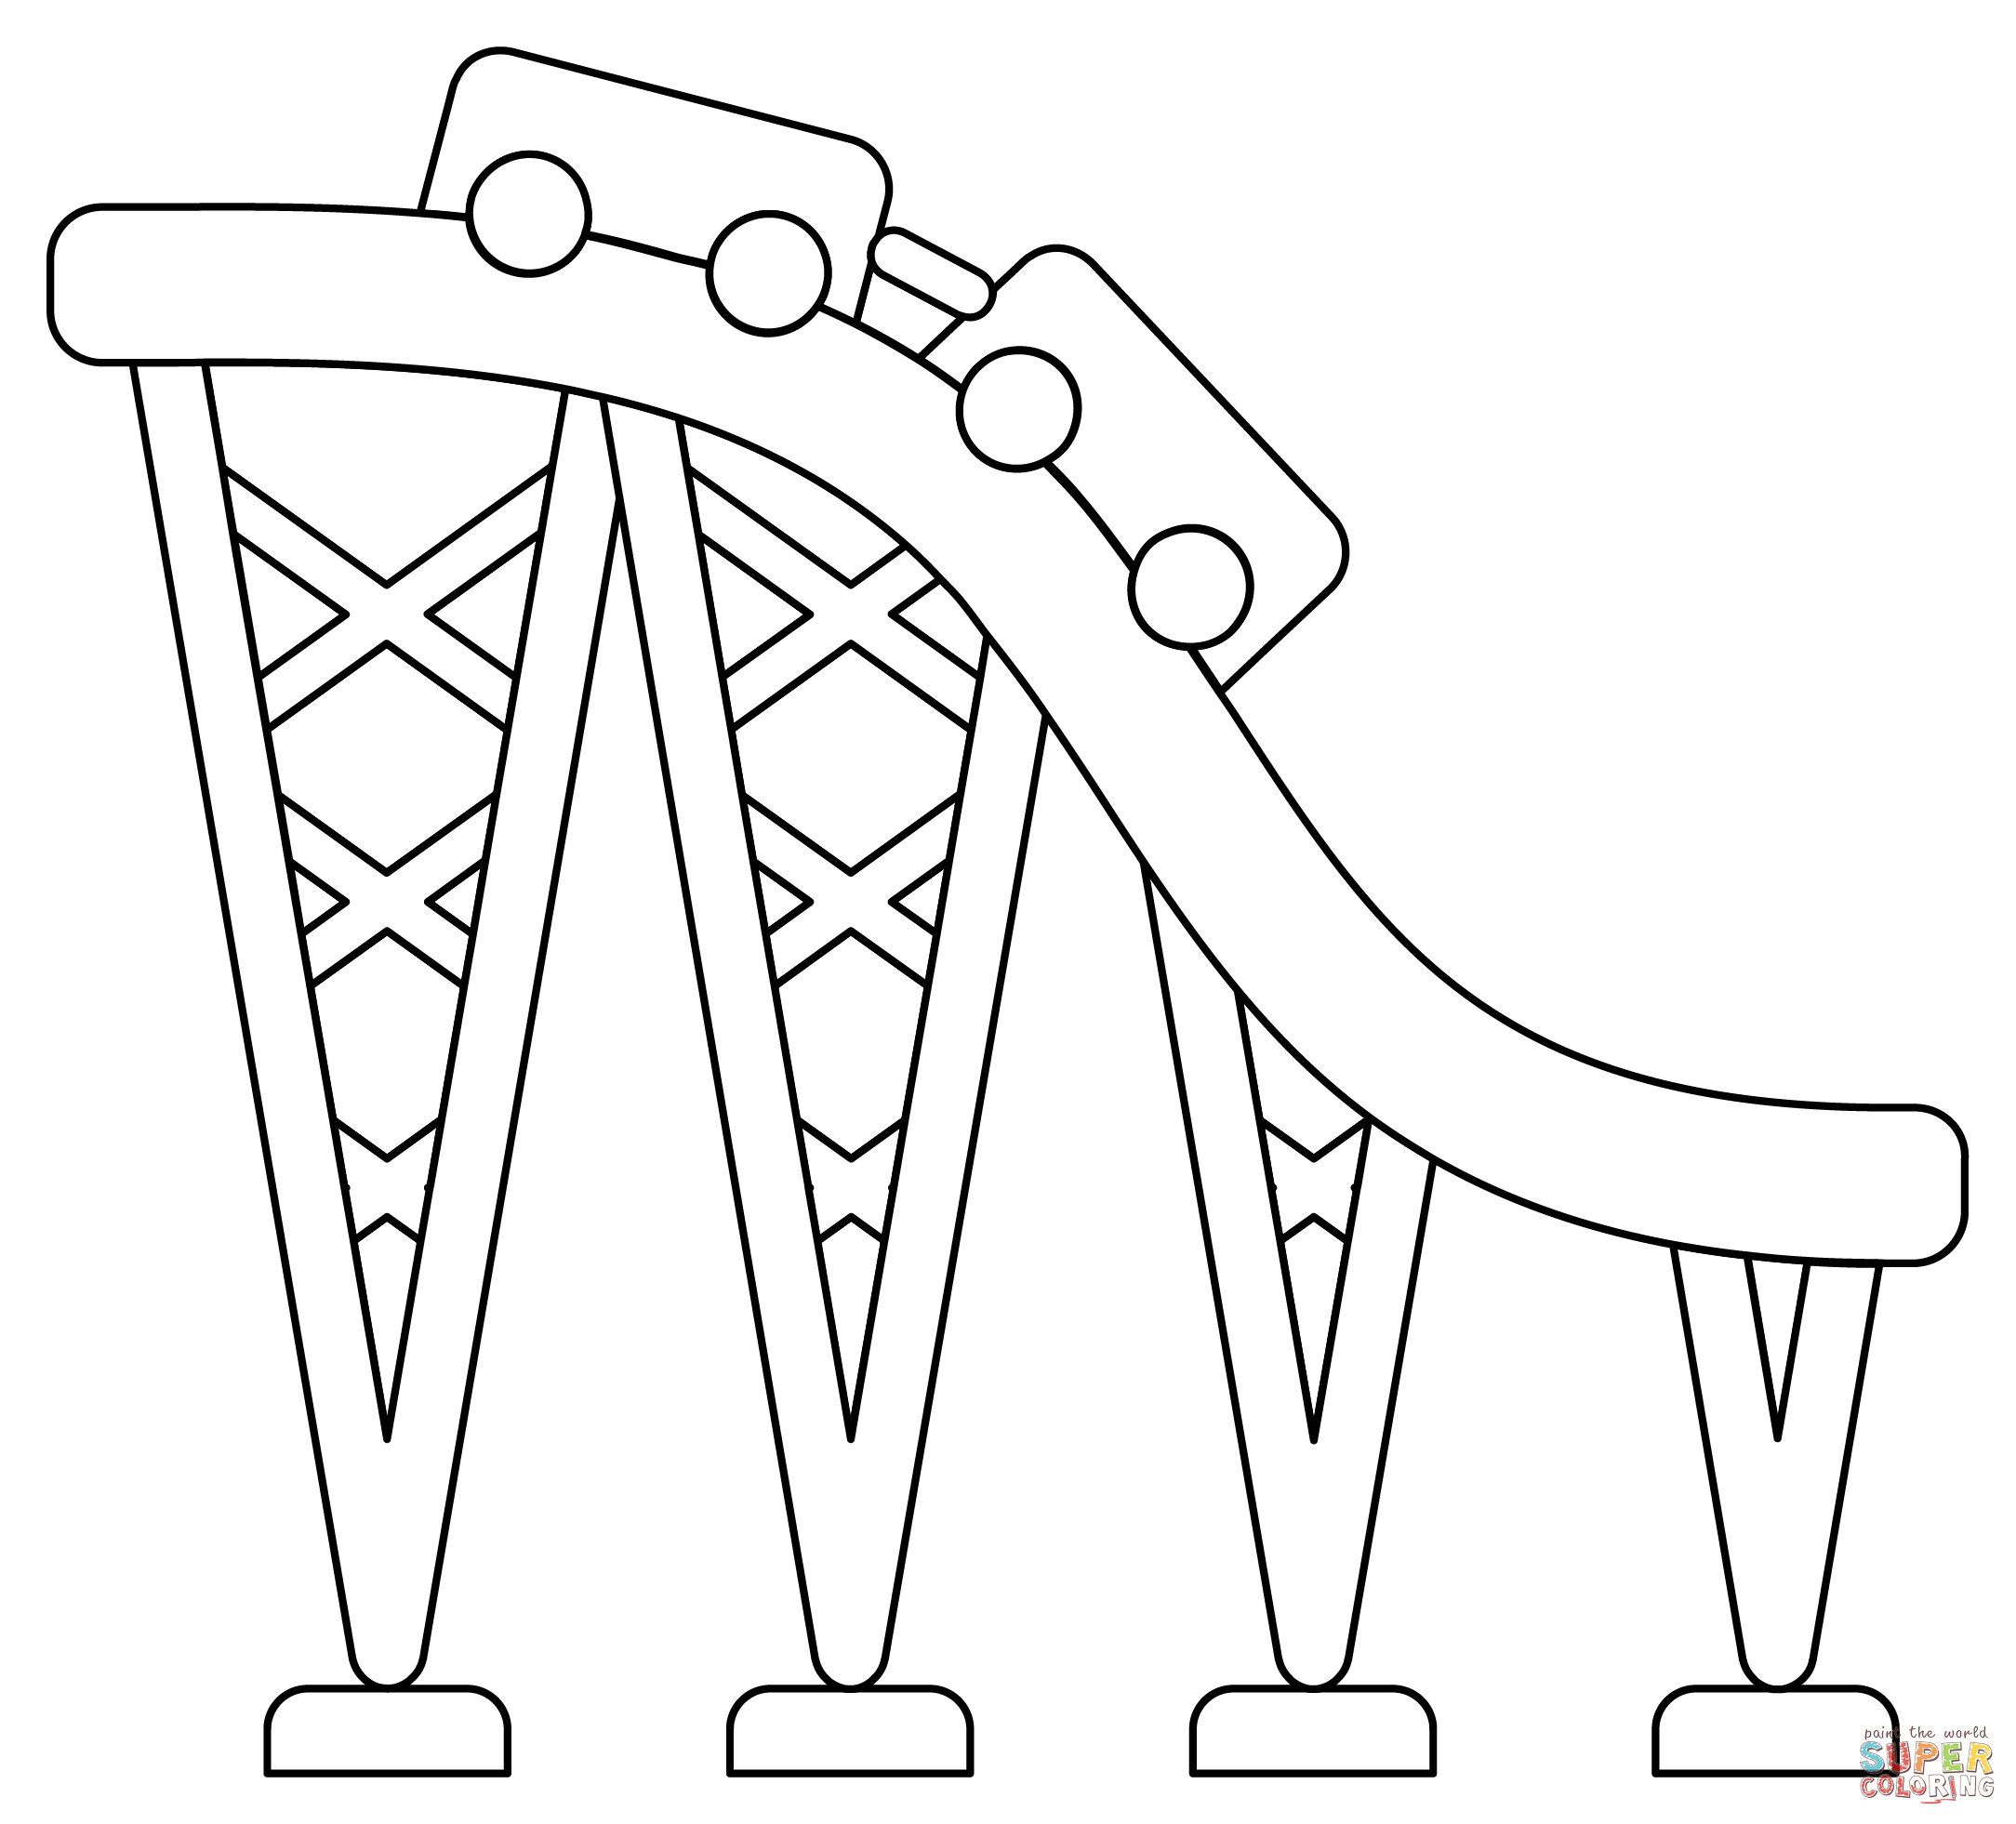 Roller Coaster coloring page | Free Printable Coloring Pages